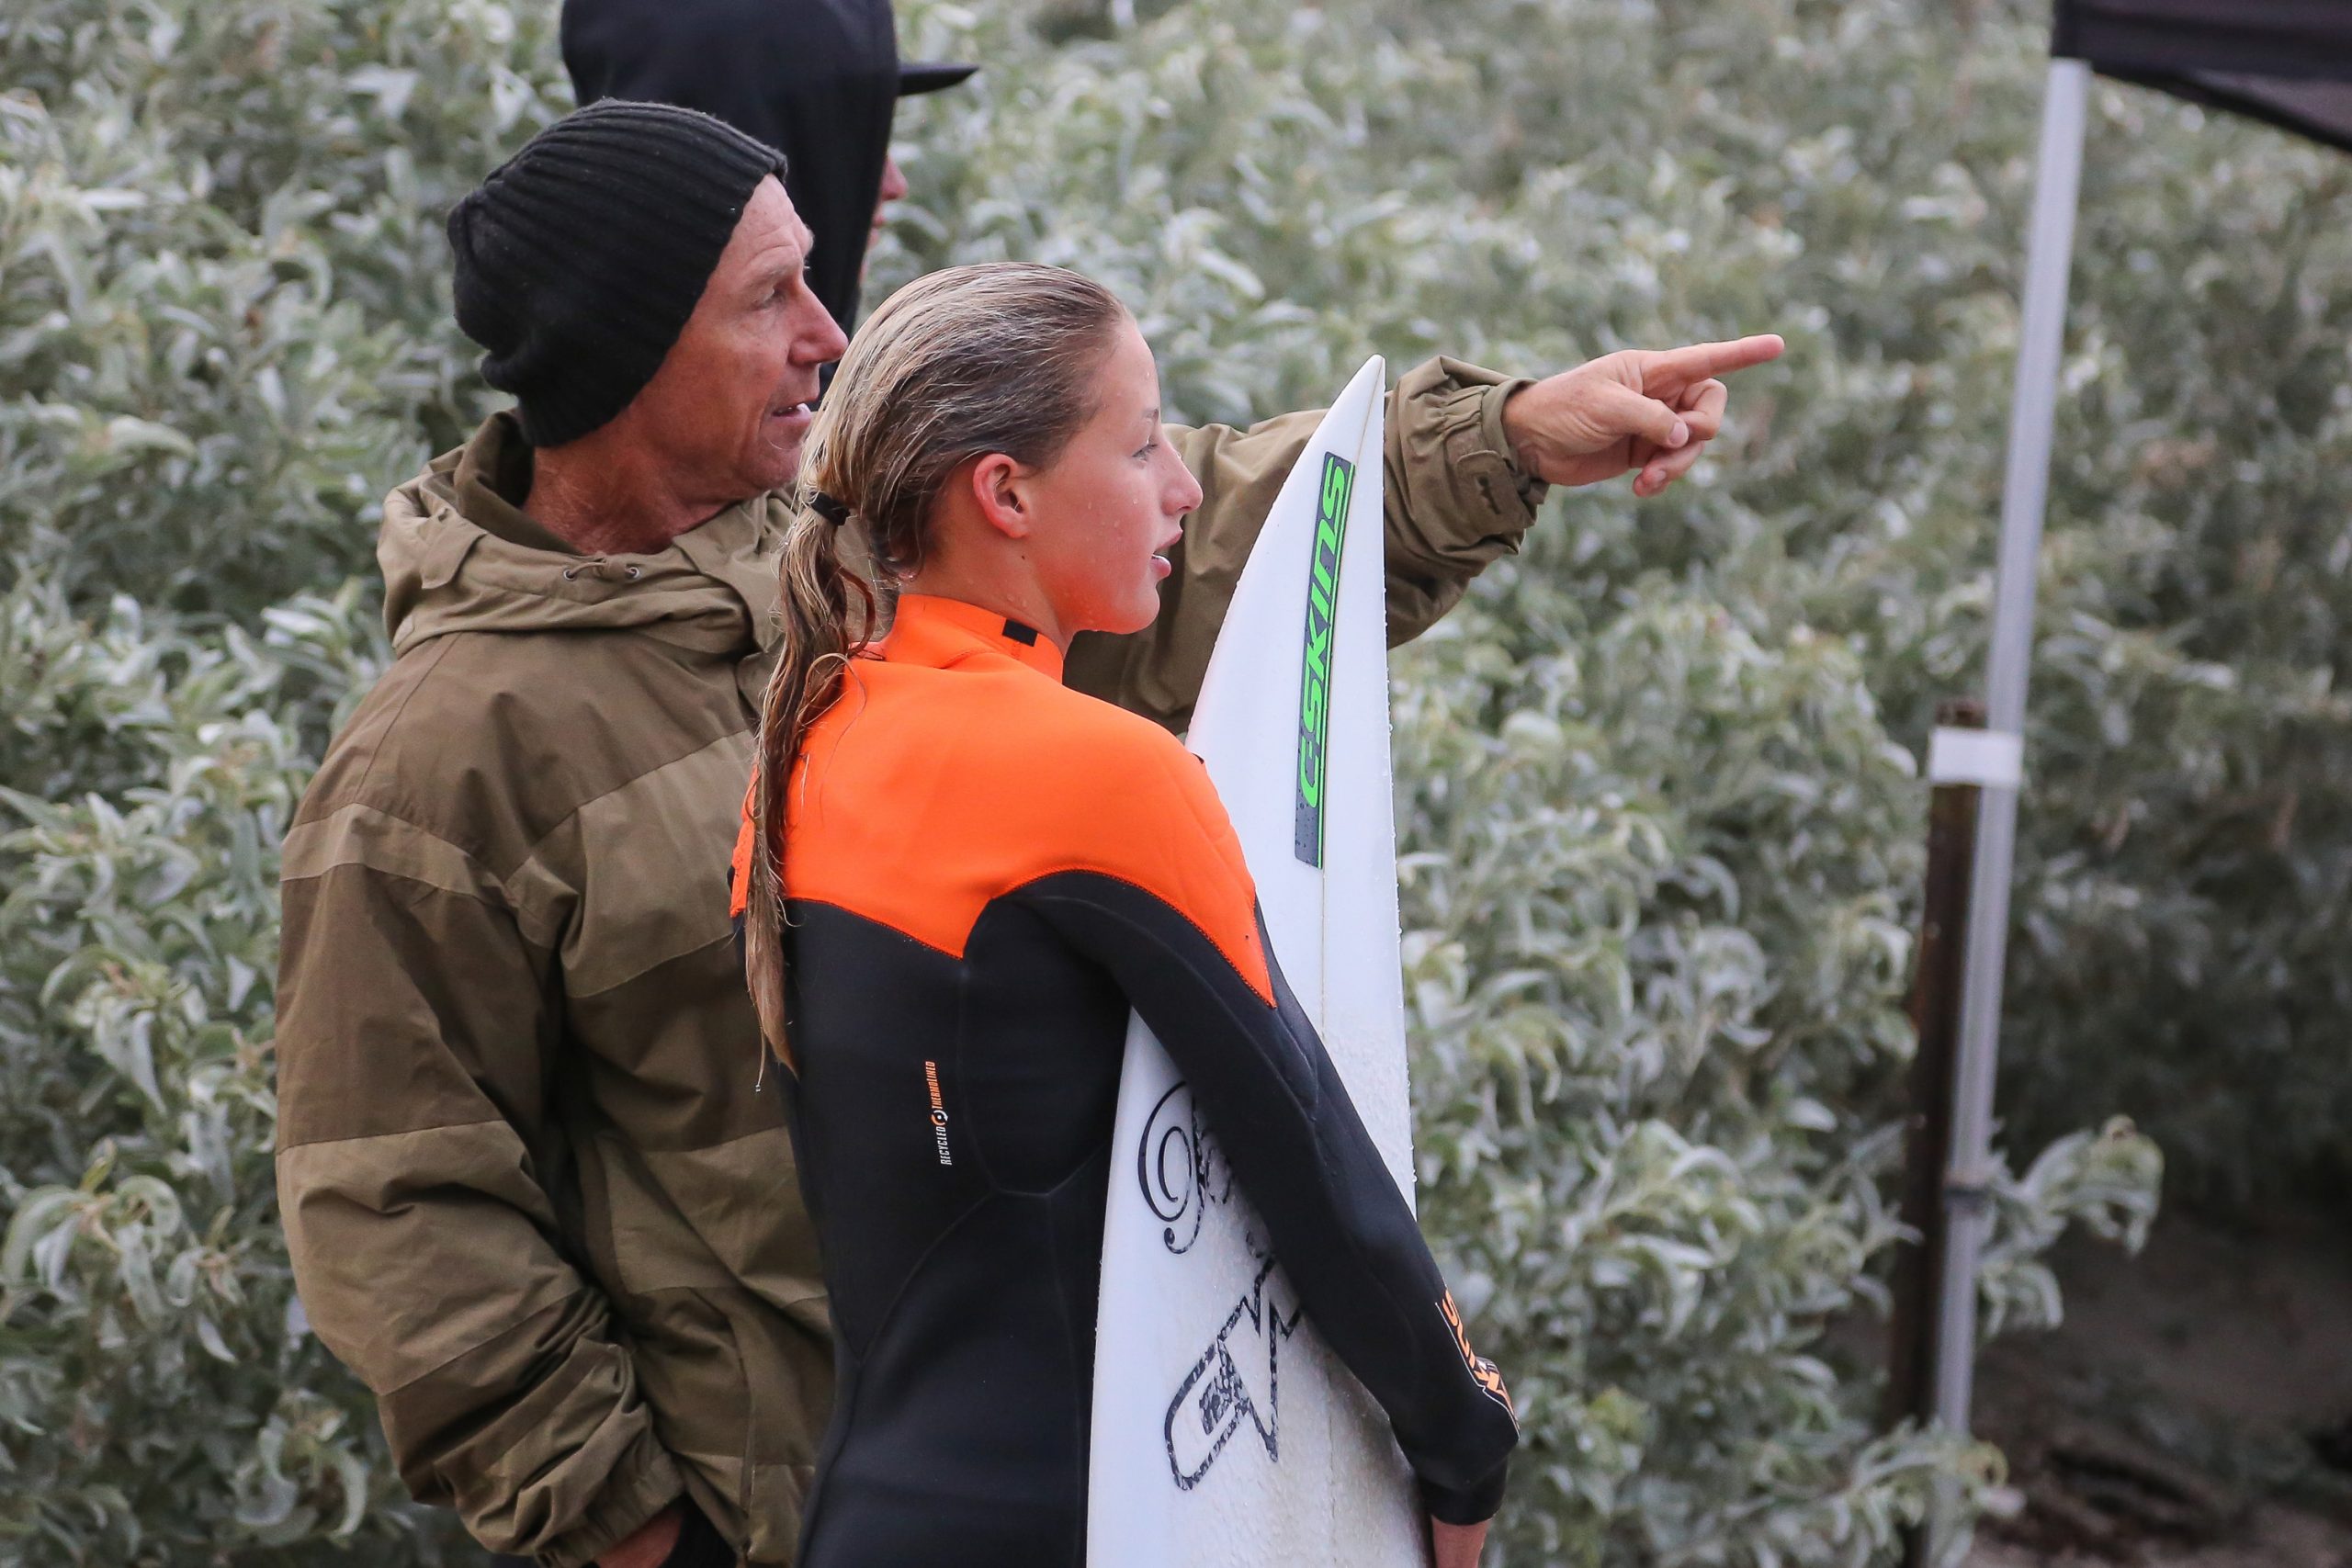 alt= Surf coach pointing and giving surfer advice